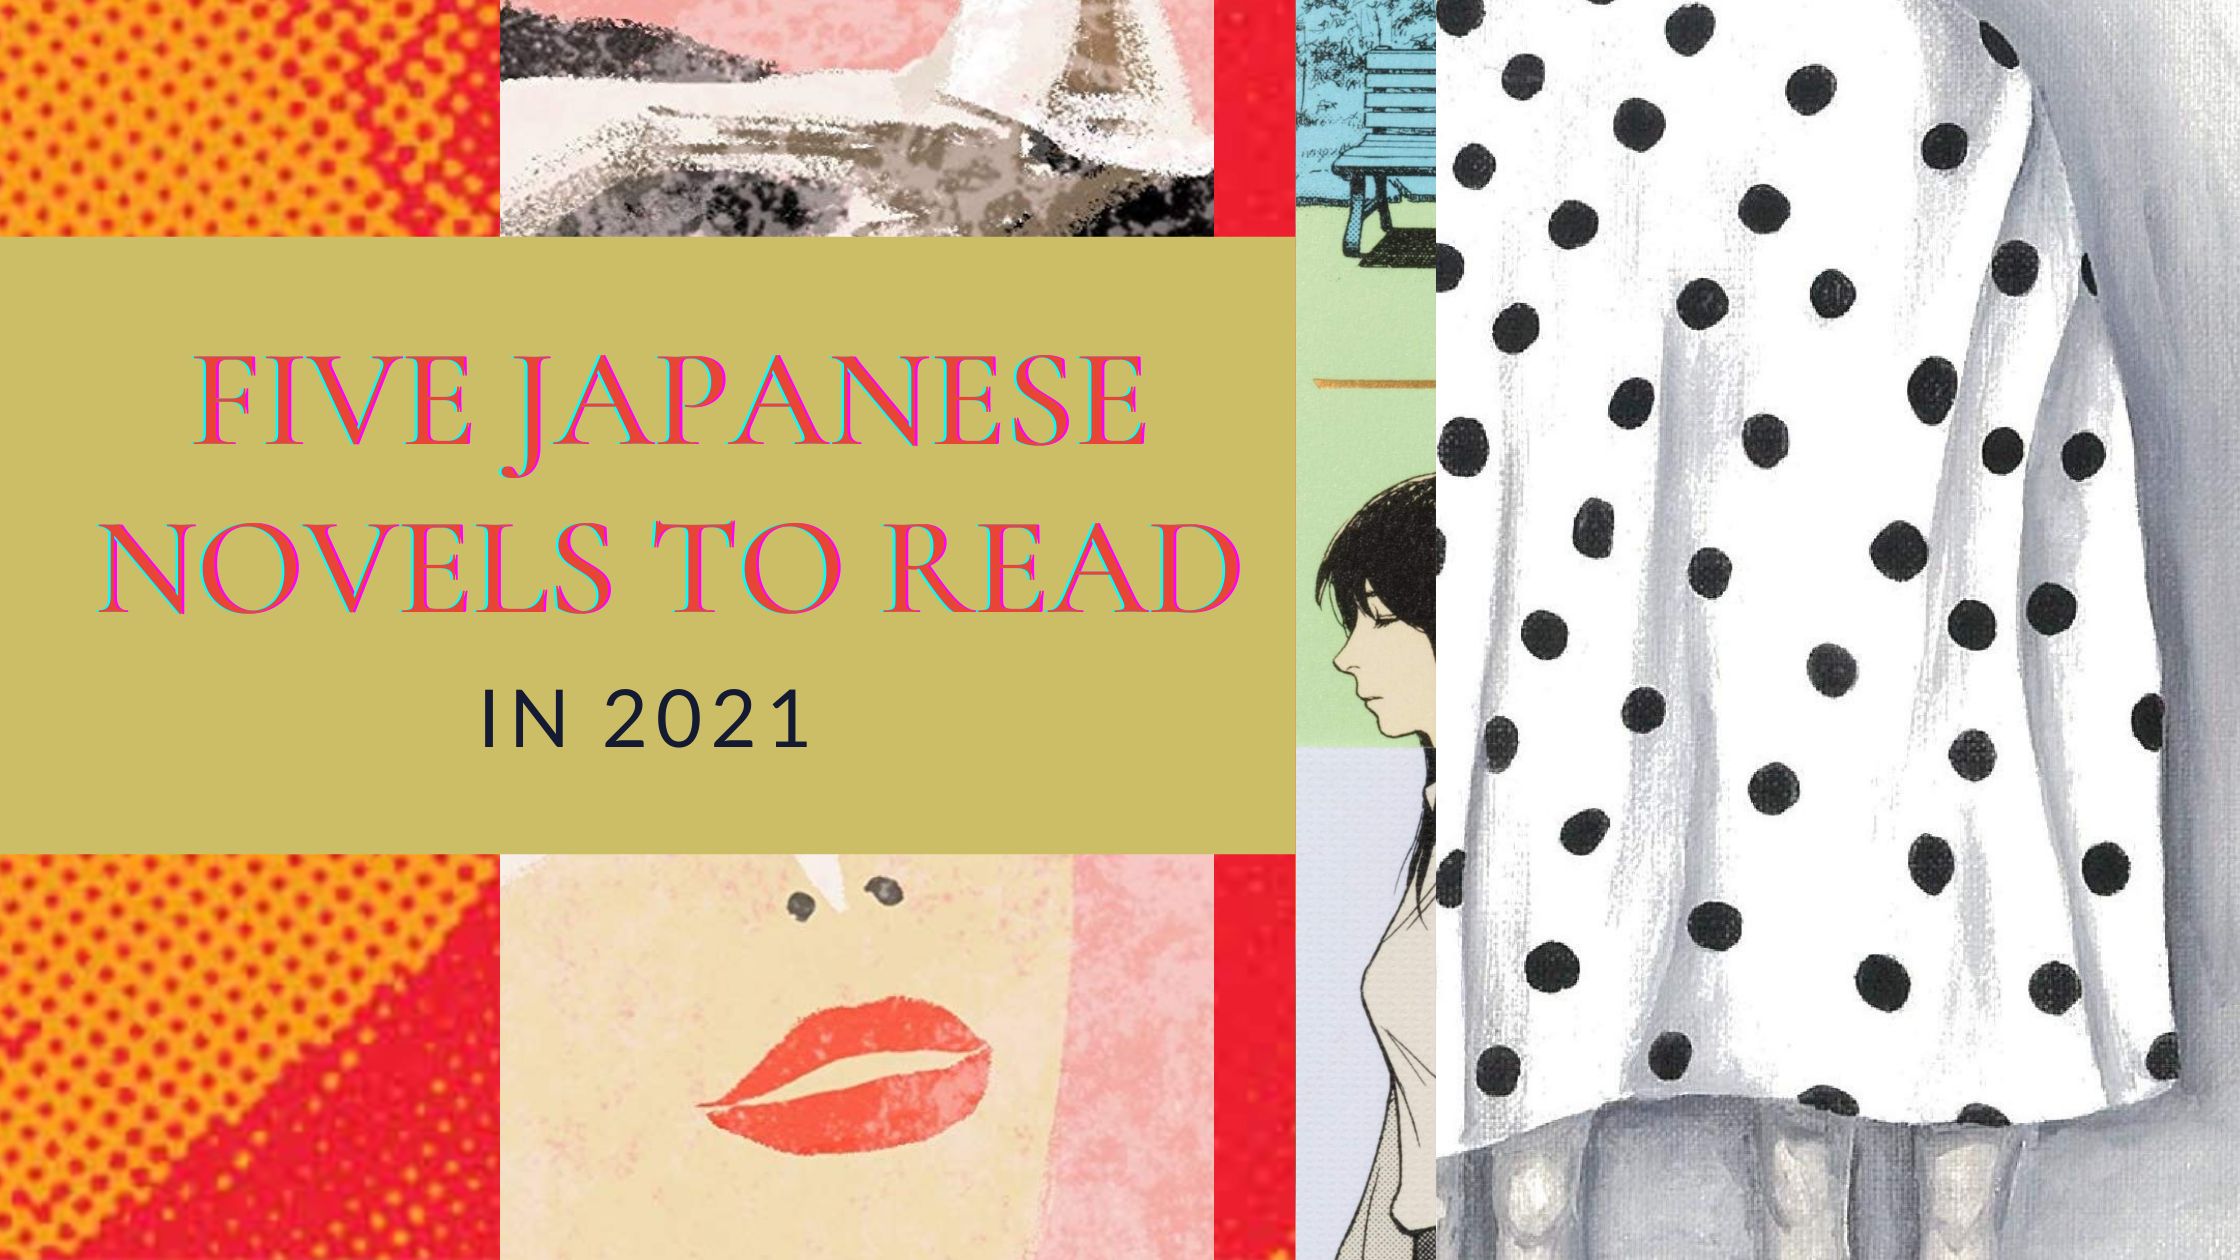 5 (Translated) Japanese Novels to Read in 2021